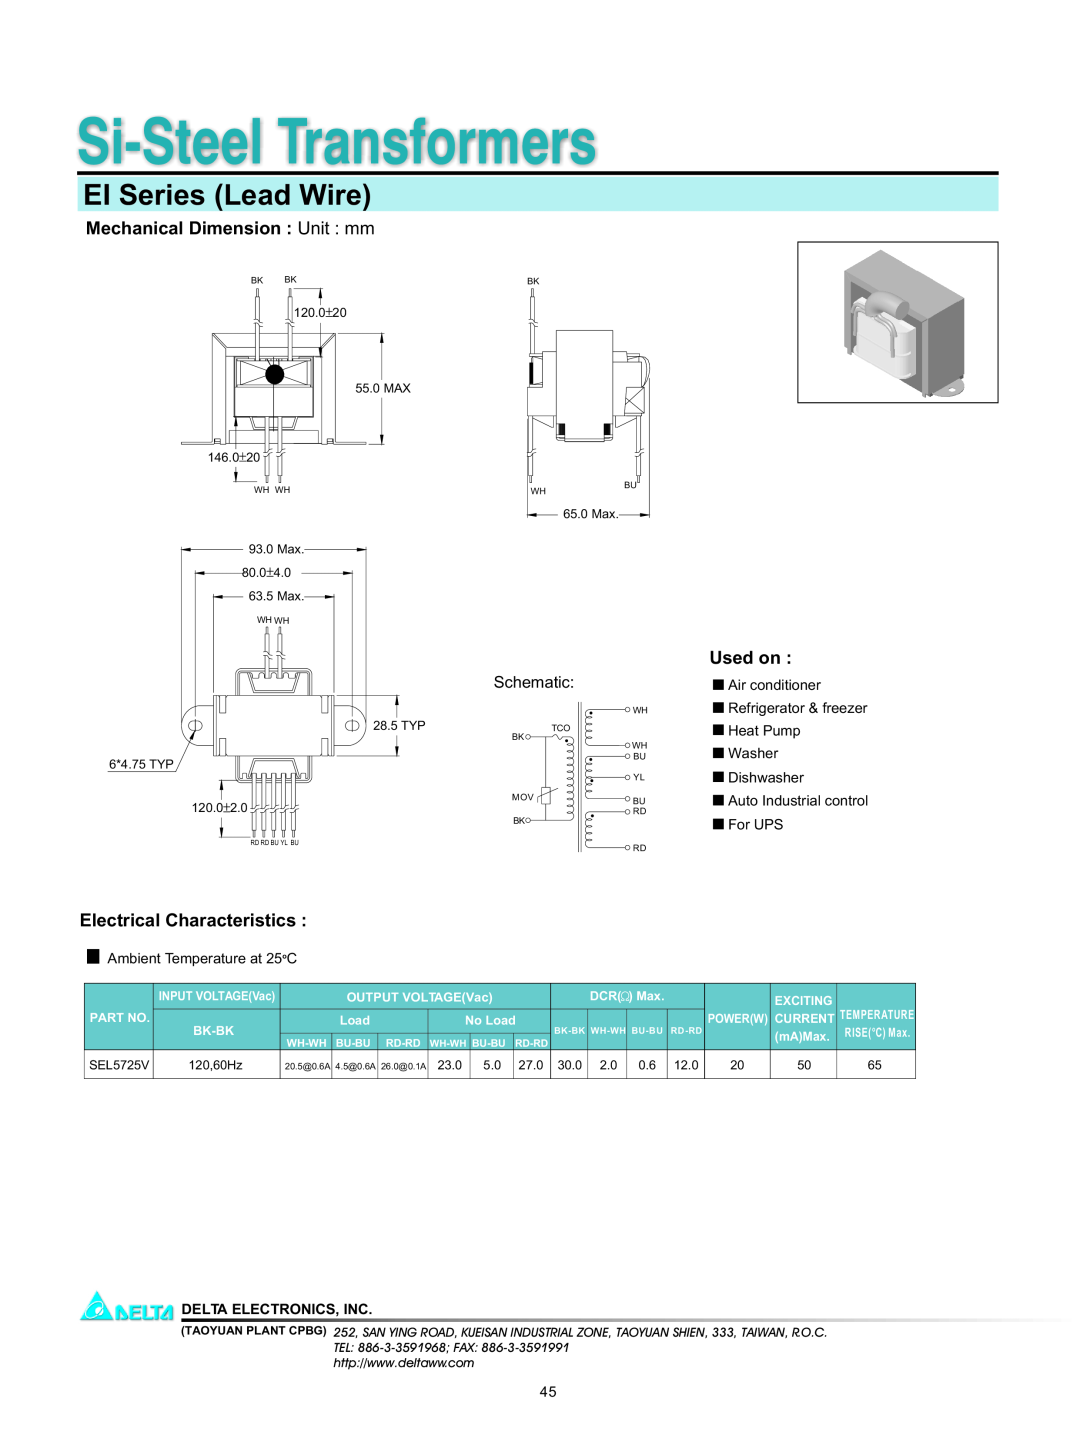 Delta Electronics manual Si-Steel Transformers, EI Series Lead Wire, Mechanical Dimension Unit mm, Used on, Schematic 